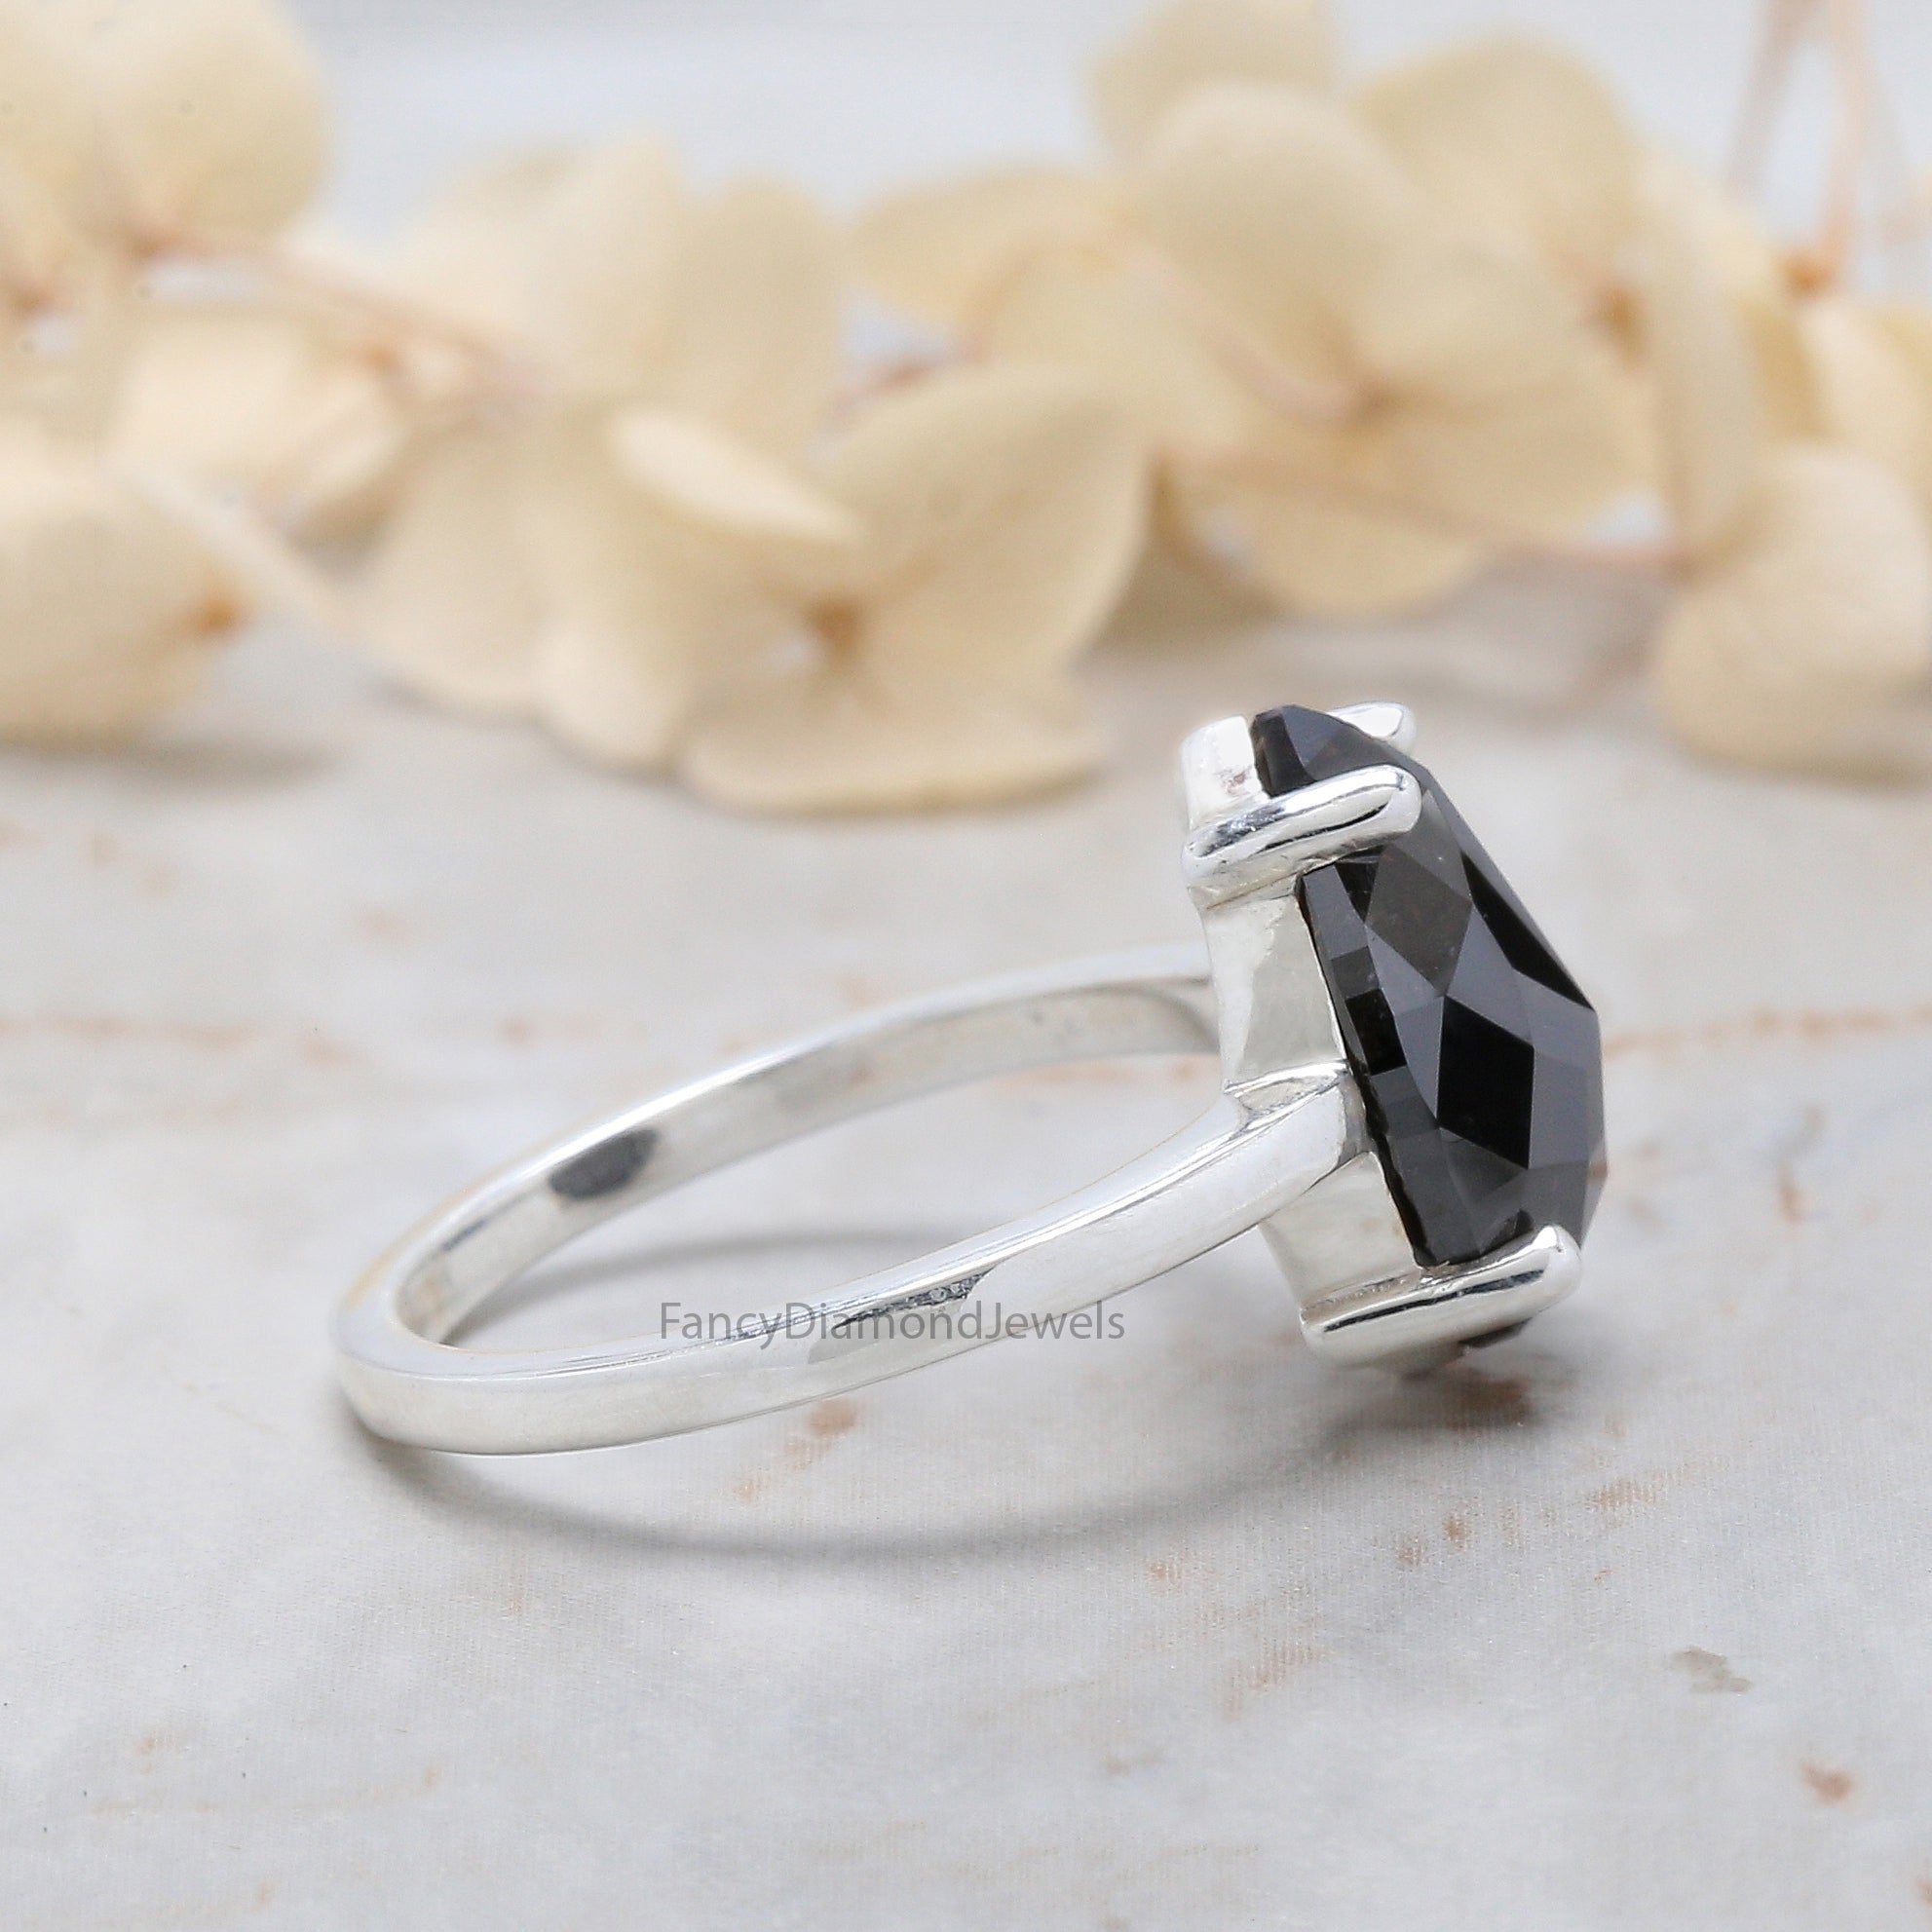 Pear Diamond Ring, Pear Engagement Ring, Black Color Pear Diamond Ring, Pear Shape Diamond Ring, Pear Solitaire Ring, Pear Cut Ring, QL2155